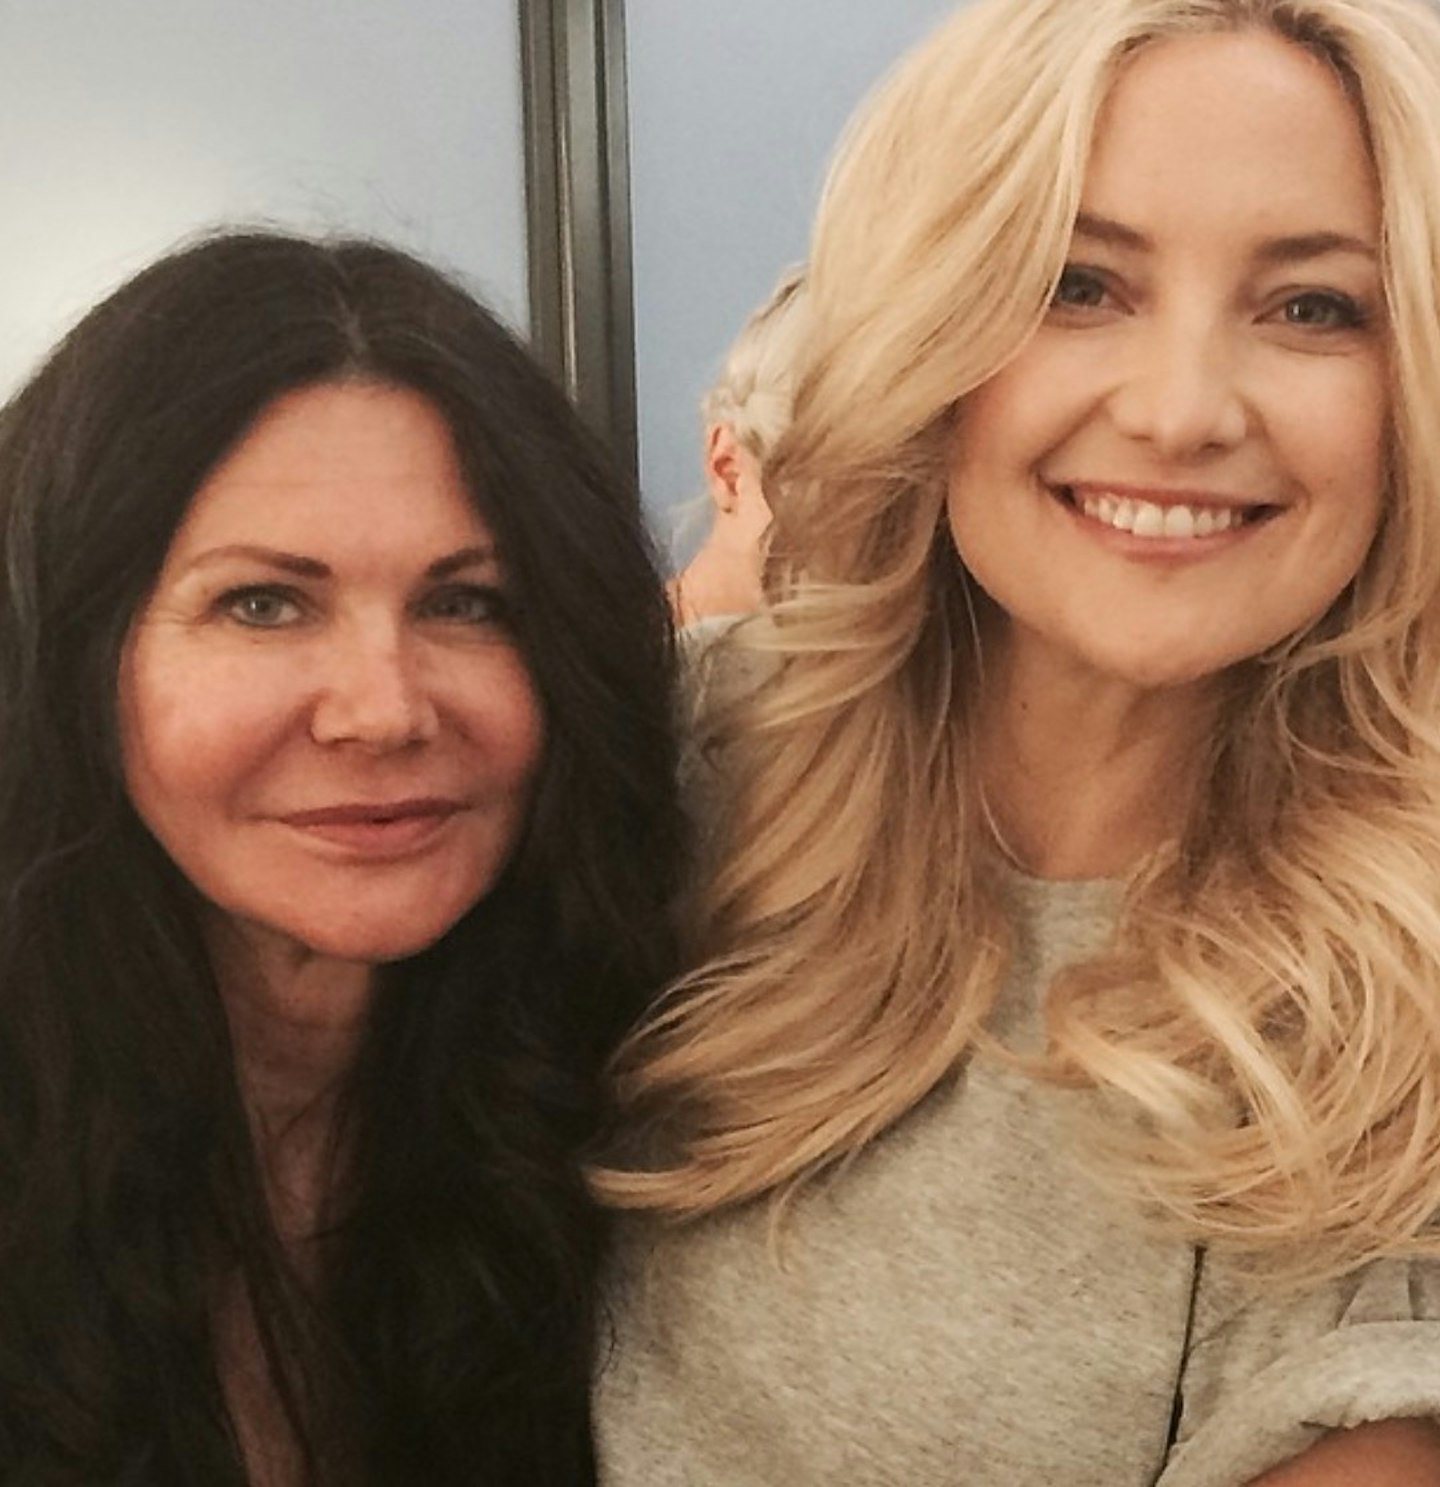 Hollywood hairstylist Wendy Iles has also worked with Kate Hudson